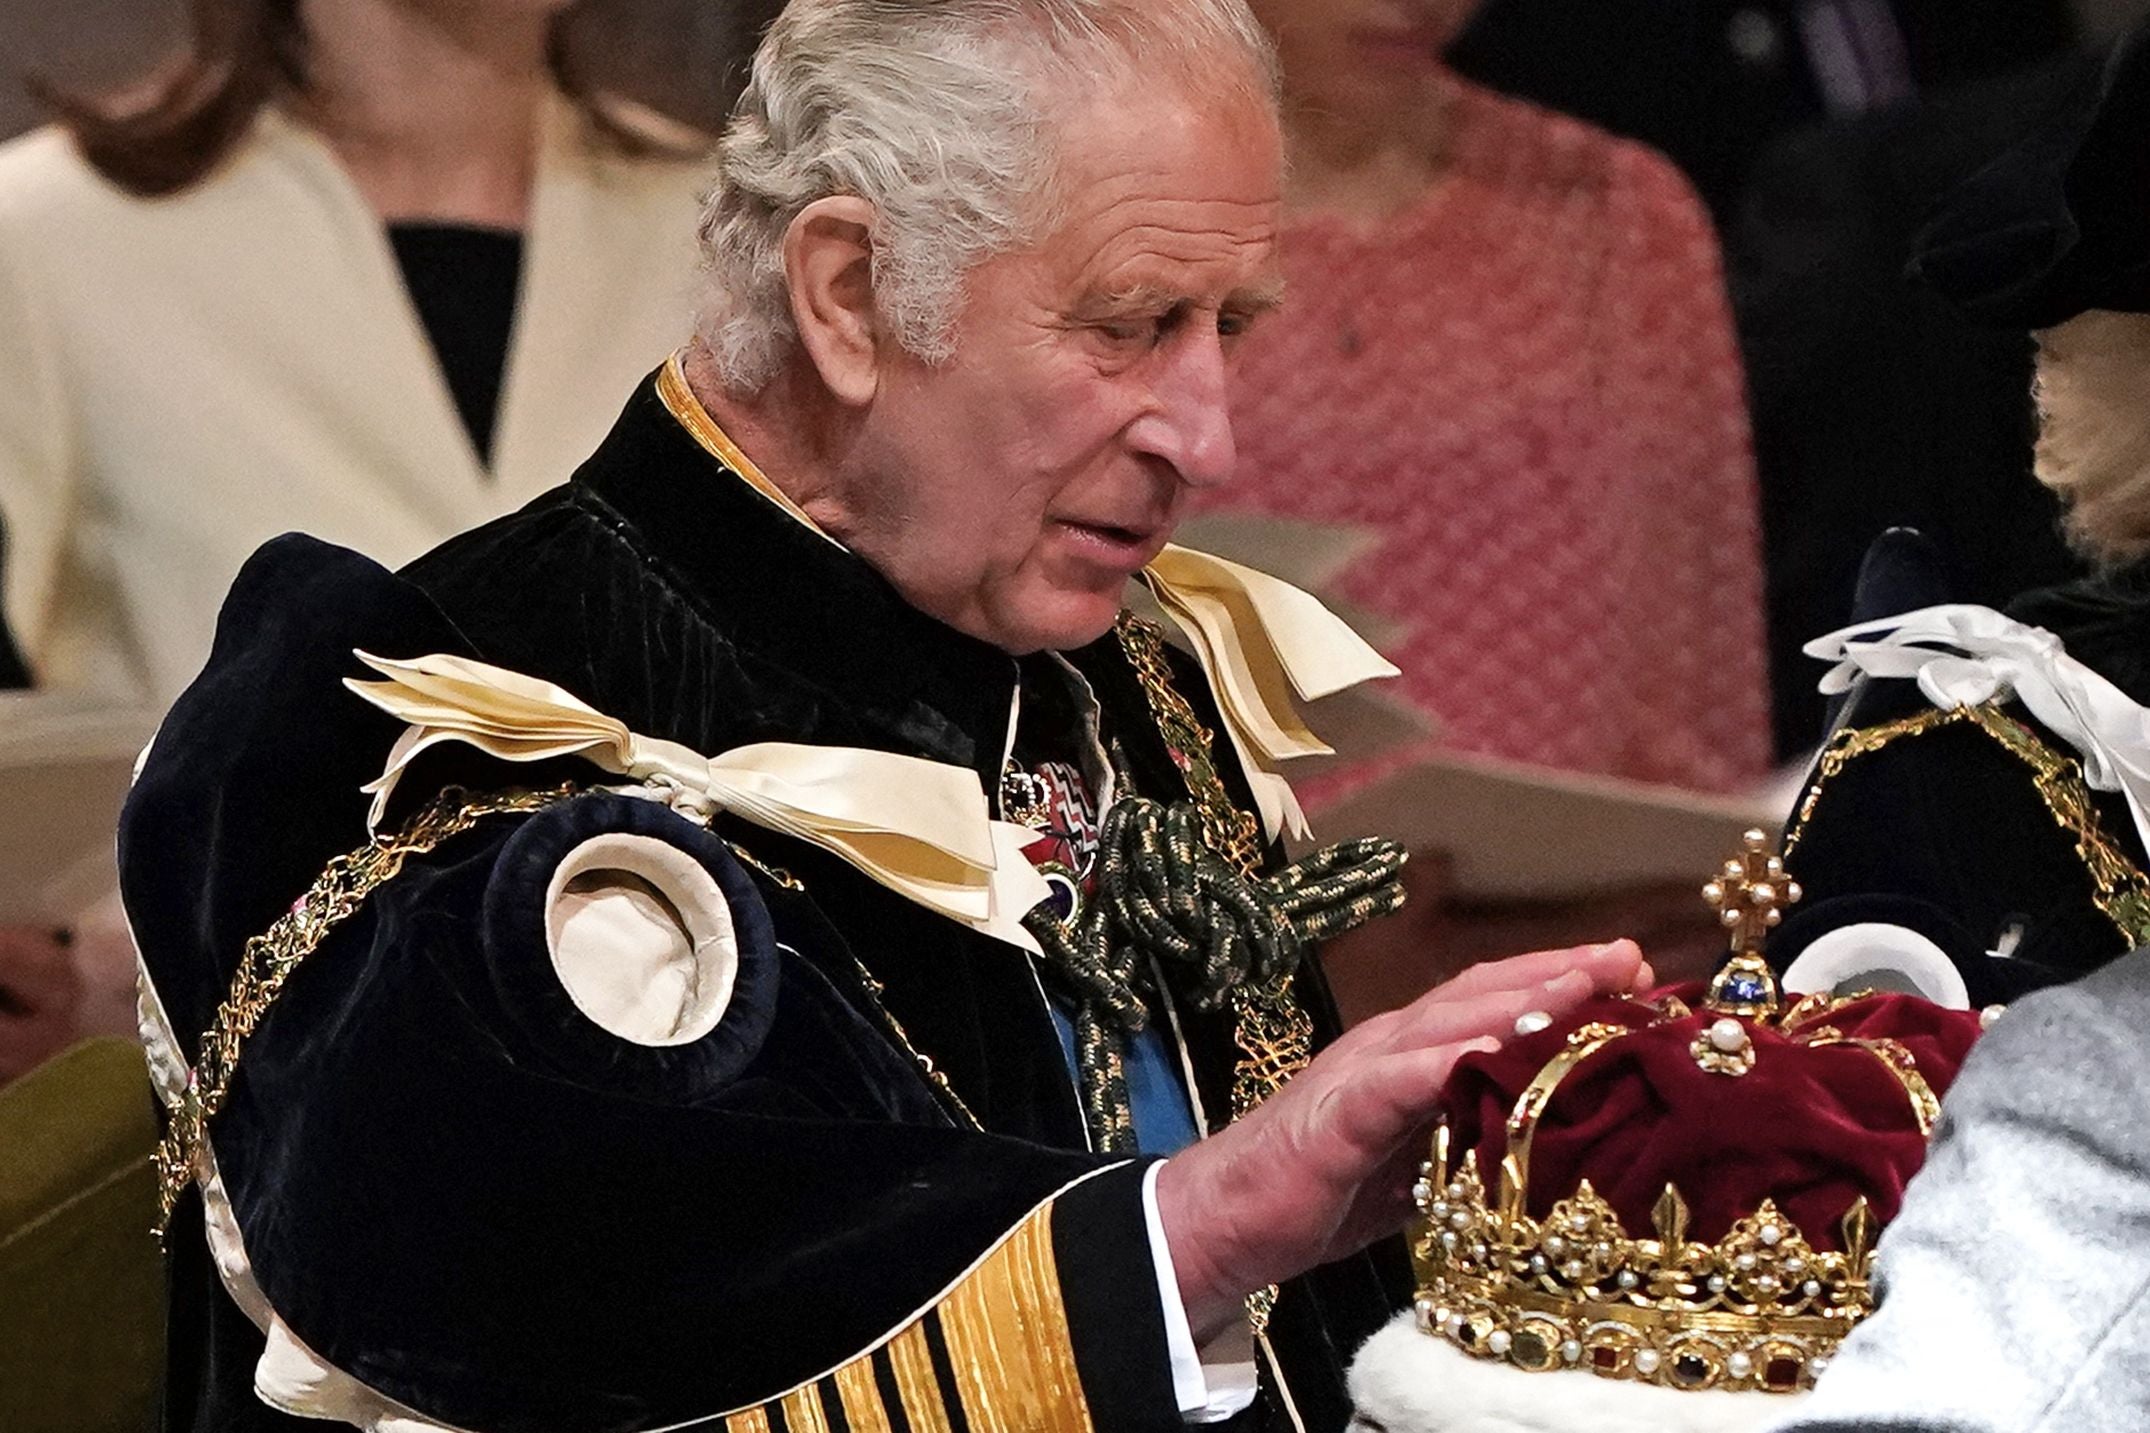 King Charles was officially crowned in Scotland